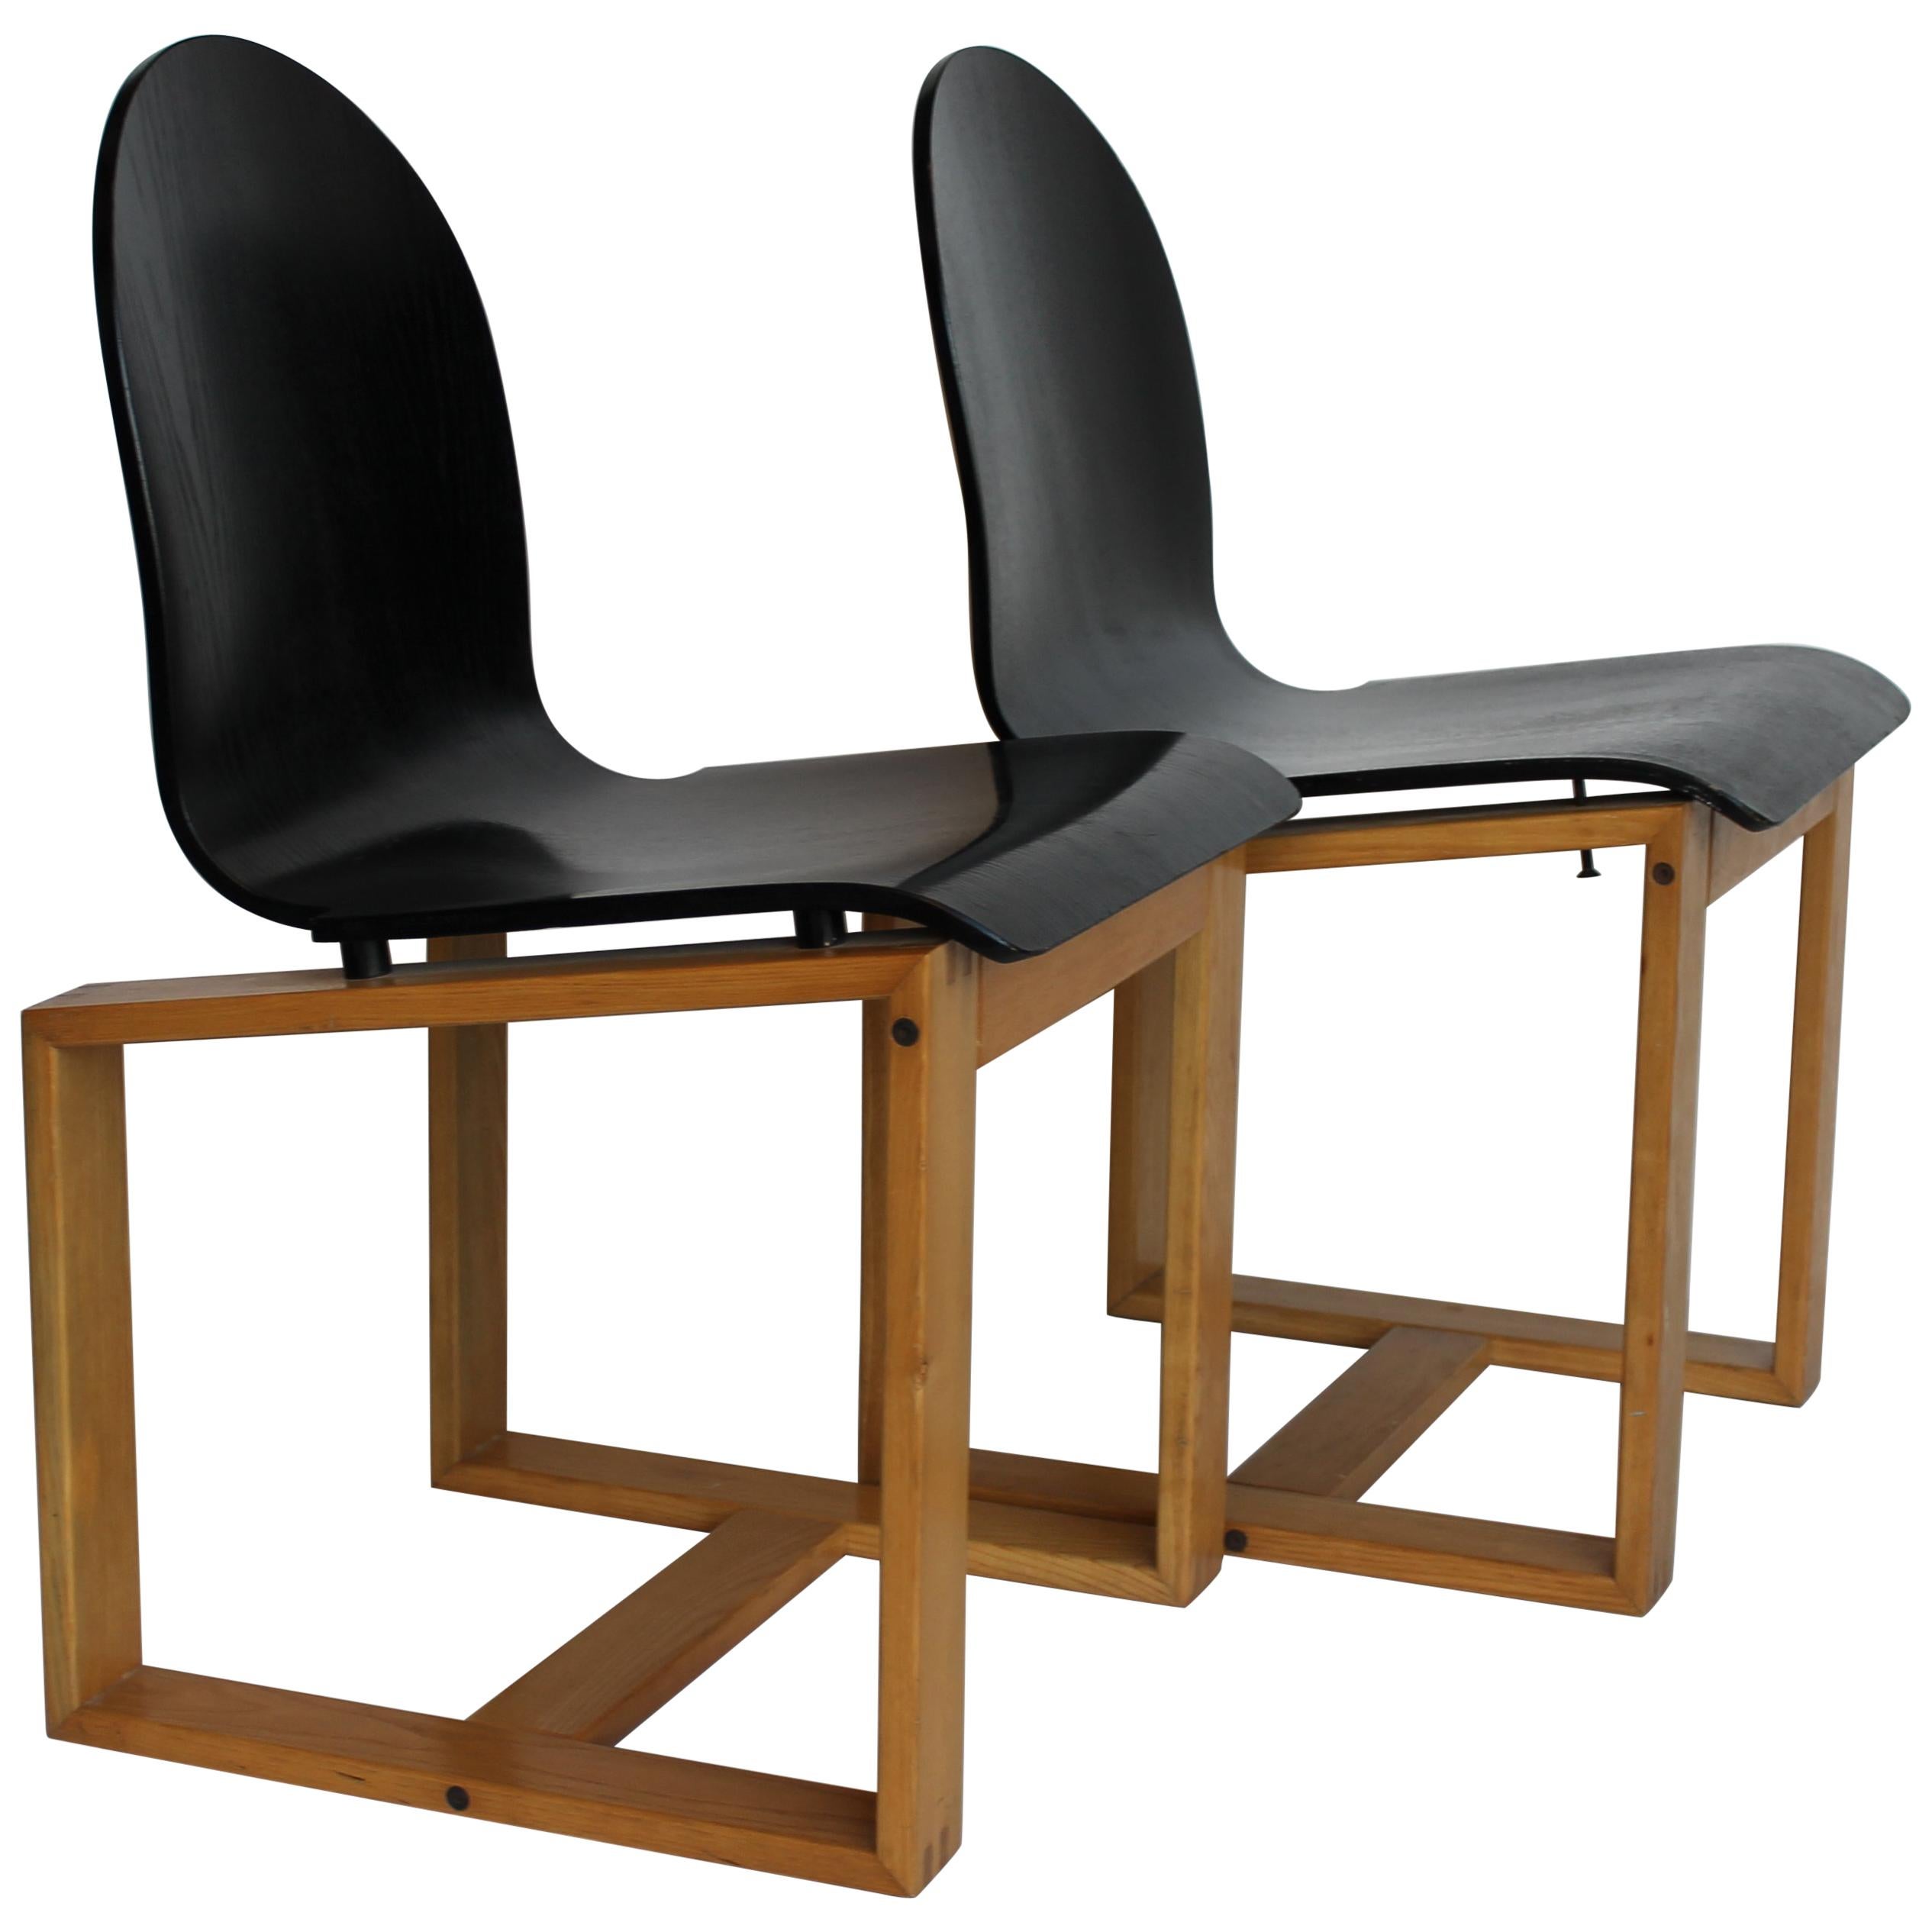 Pair of Mid-Century Italian Chairs, Cubic Wood Structure and Curved Seat, 1970s